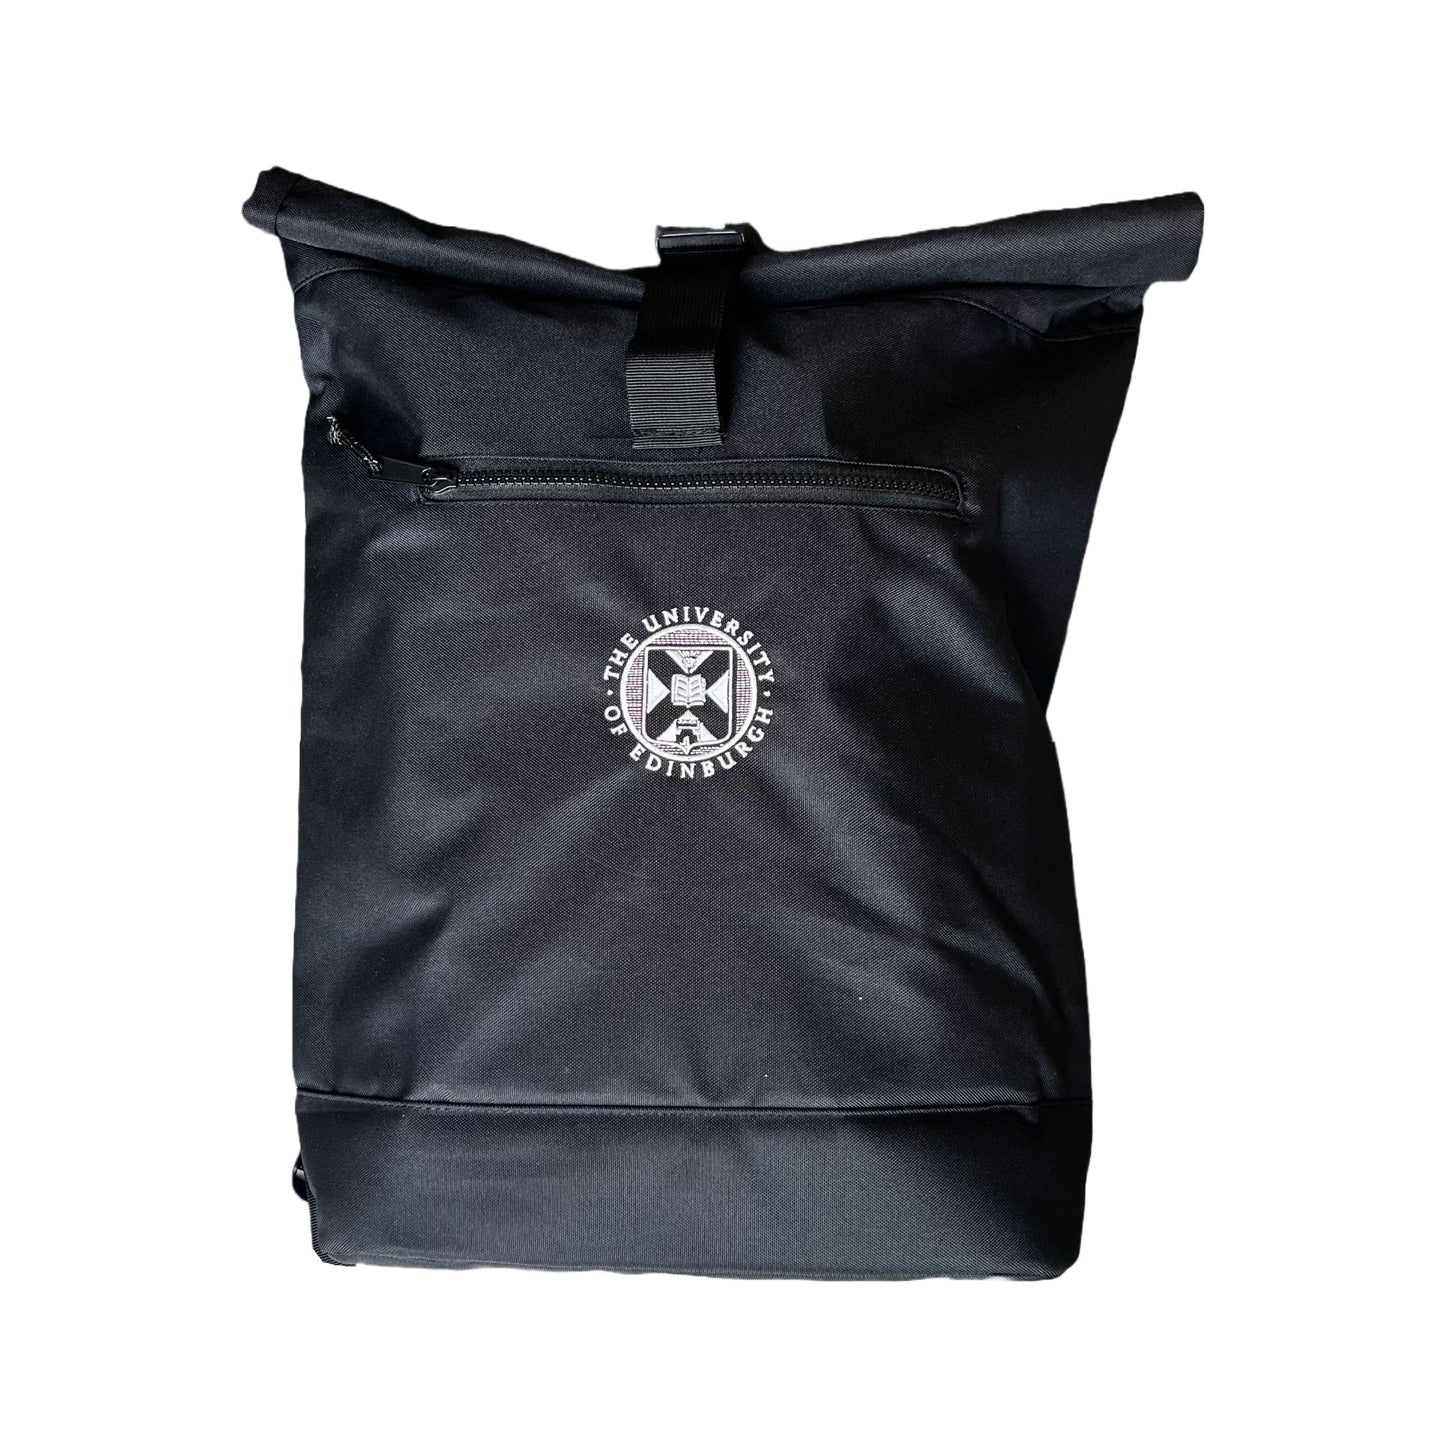 Black roll-top backpack with University of Edinburgh crest stitched on the centre in white.